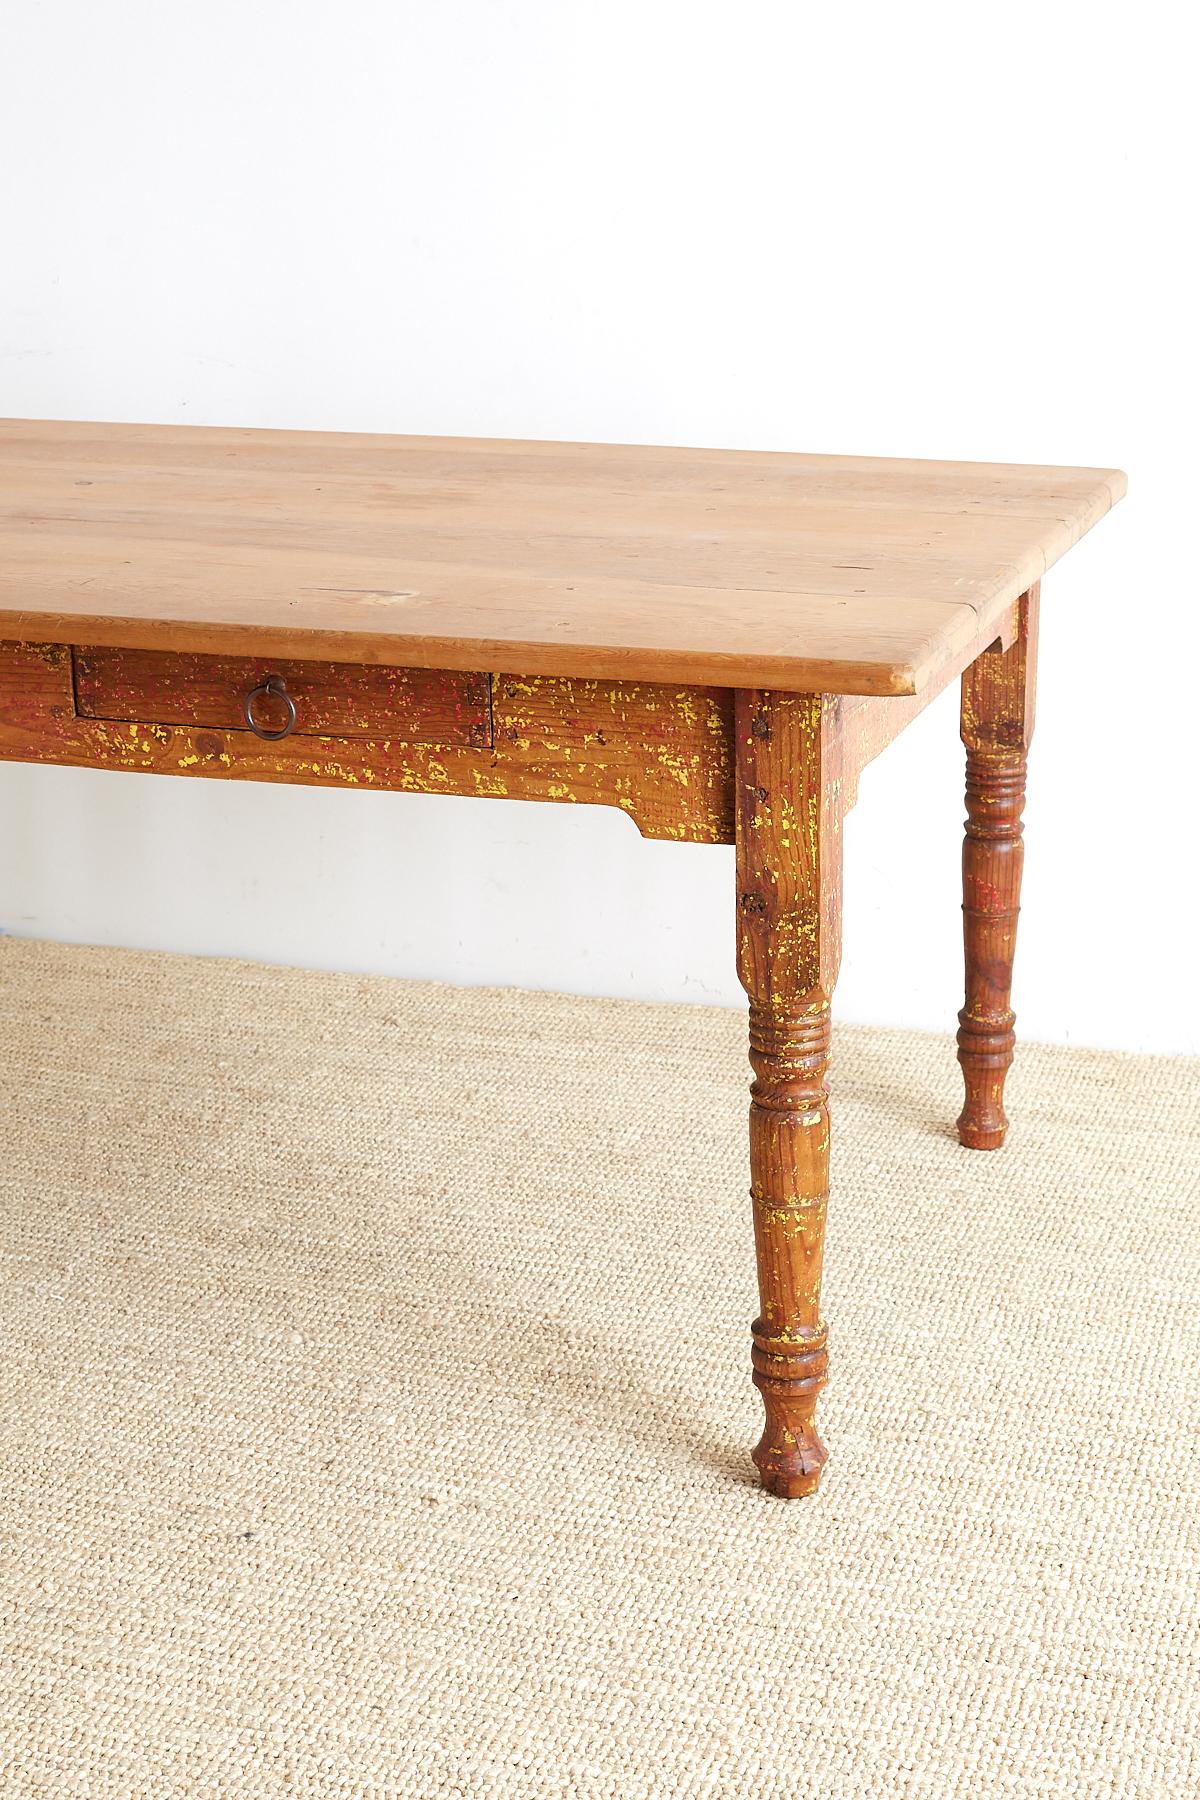 American Rustic Pine Farm Table with Old Paint Remnants